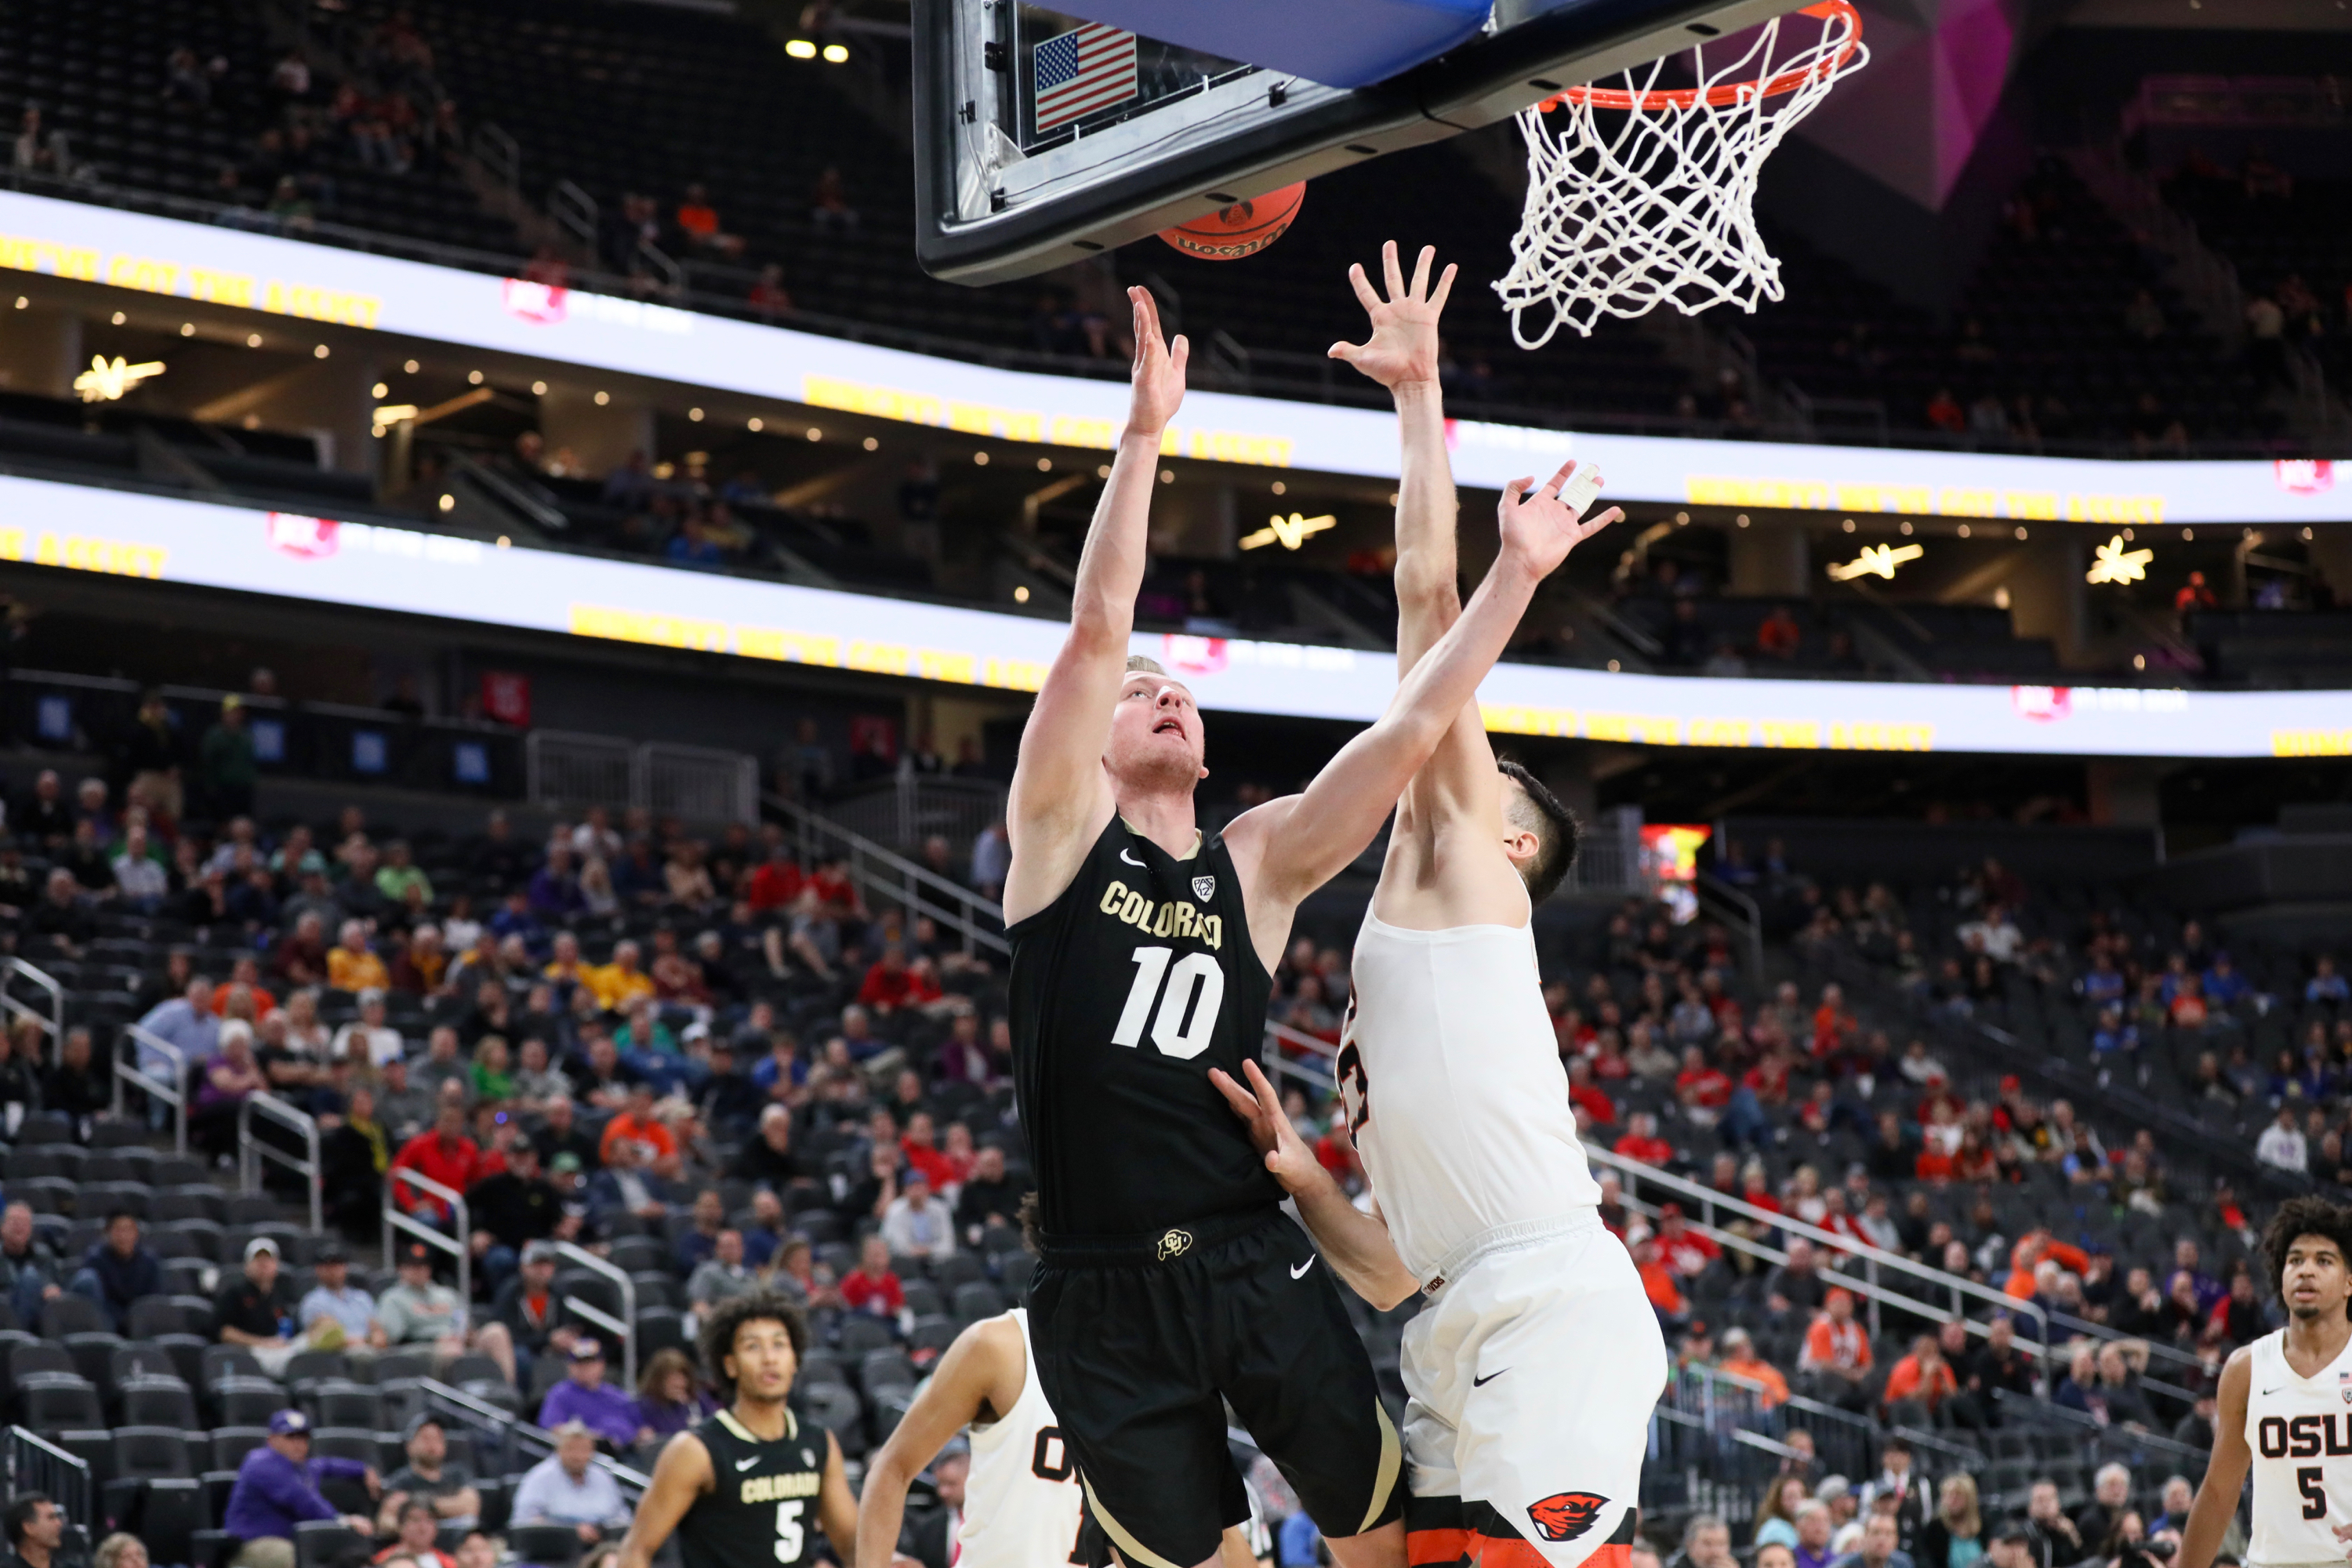 Buffs survive OSU’s rally, advance to Pac-12 Tourney semifinals